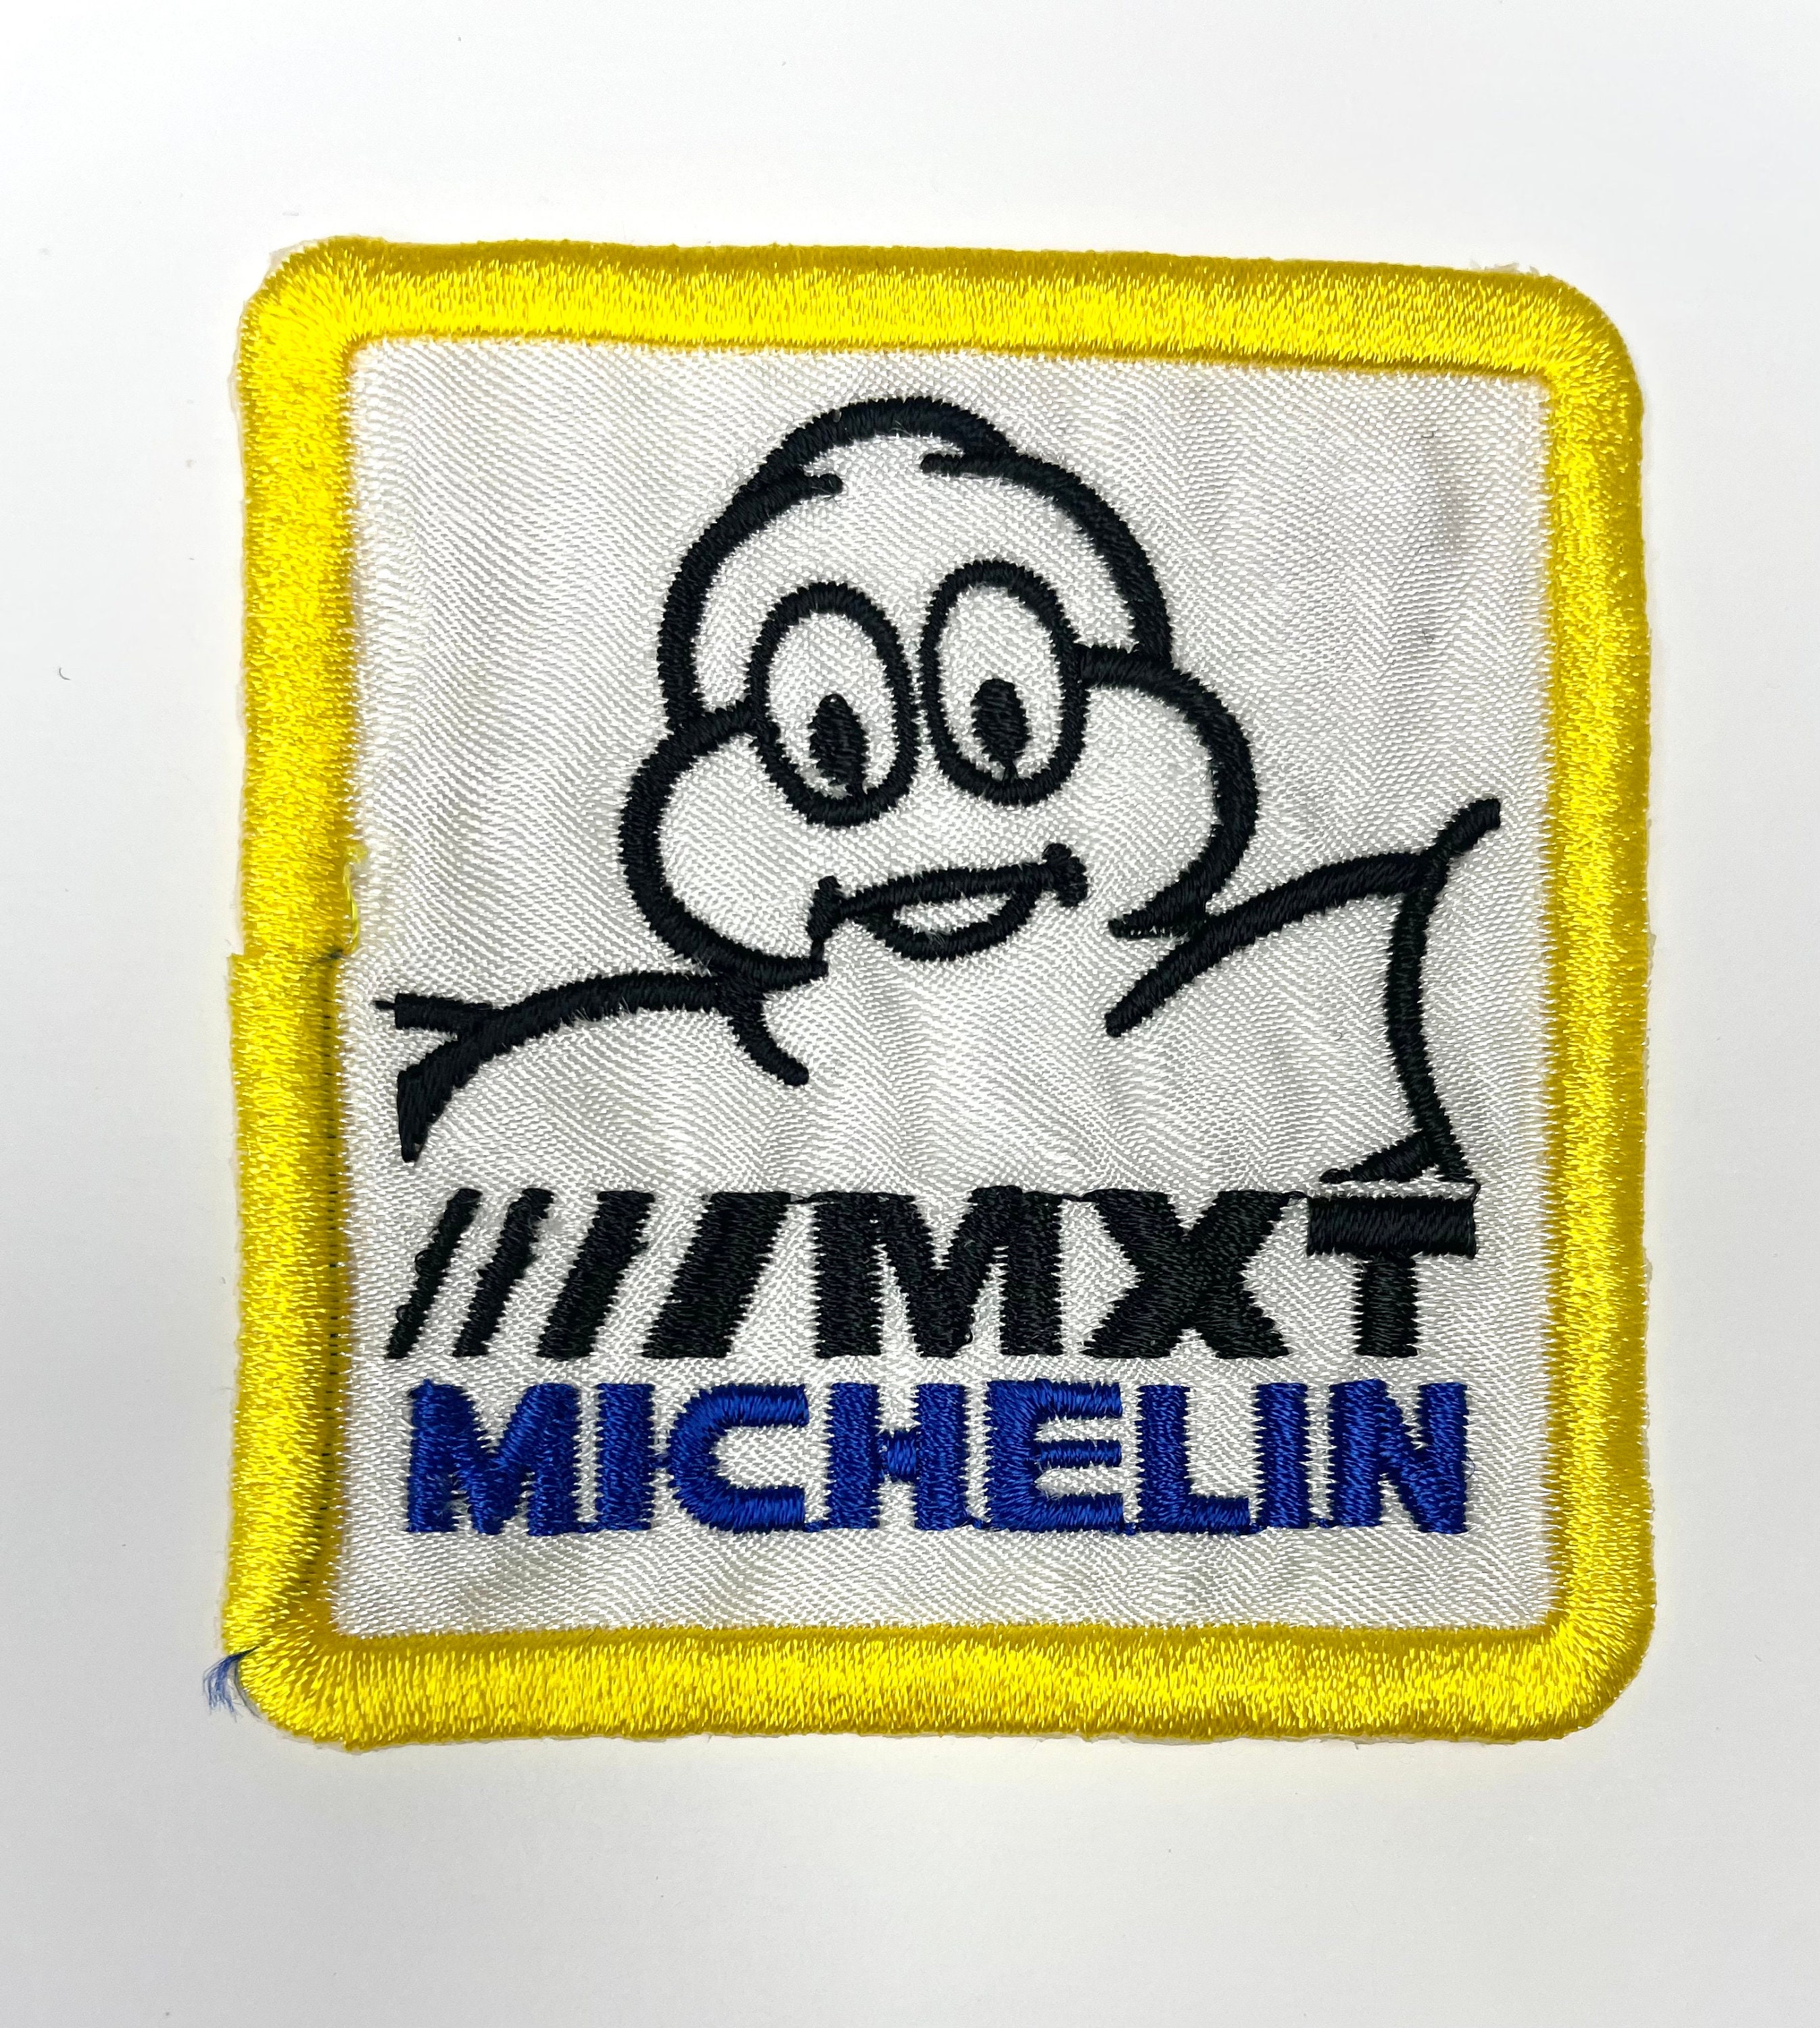 Michelin Patch 